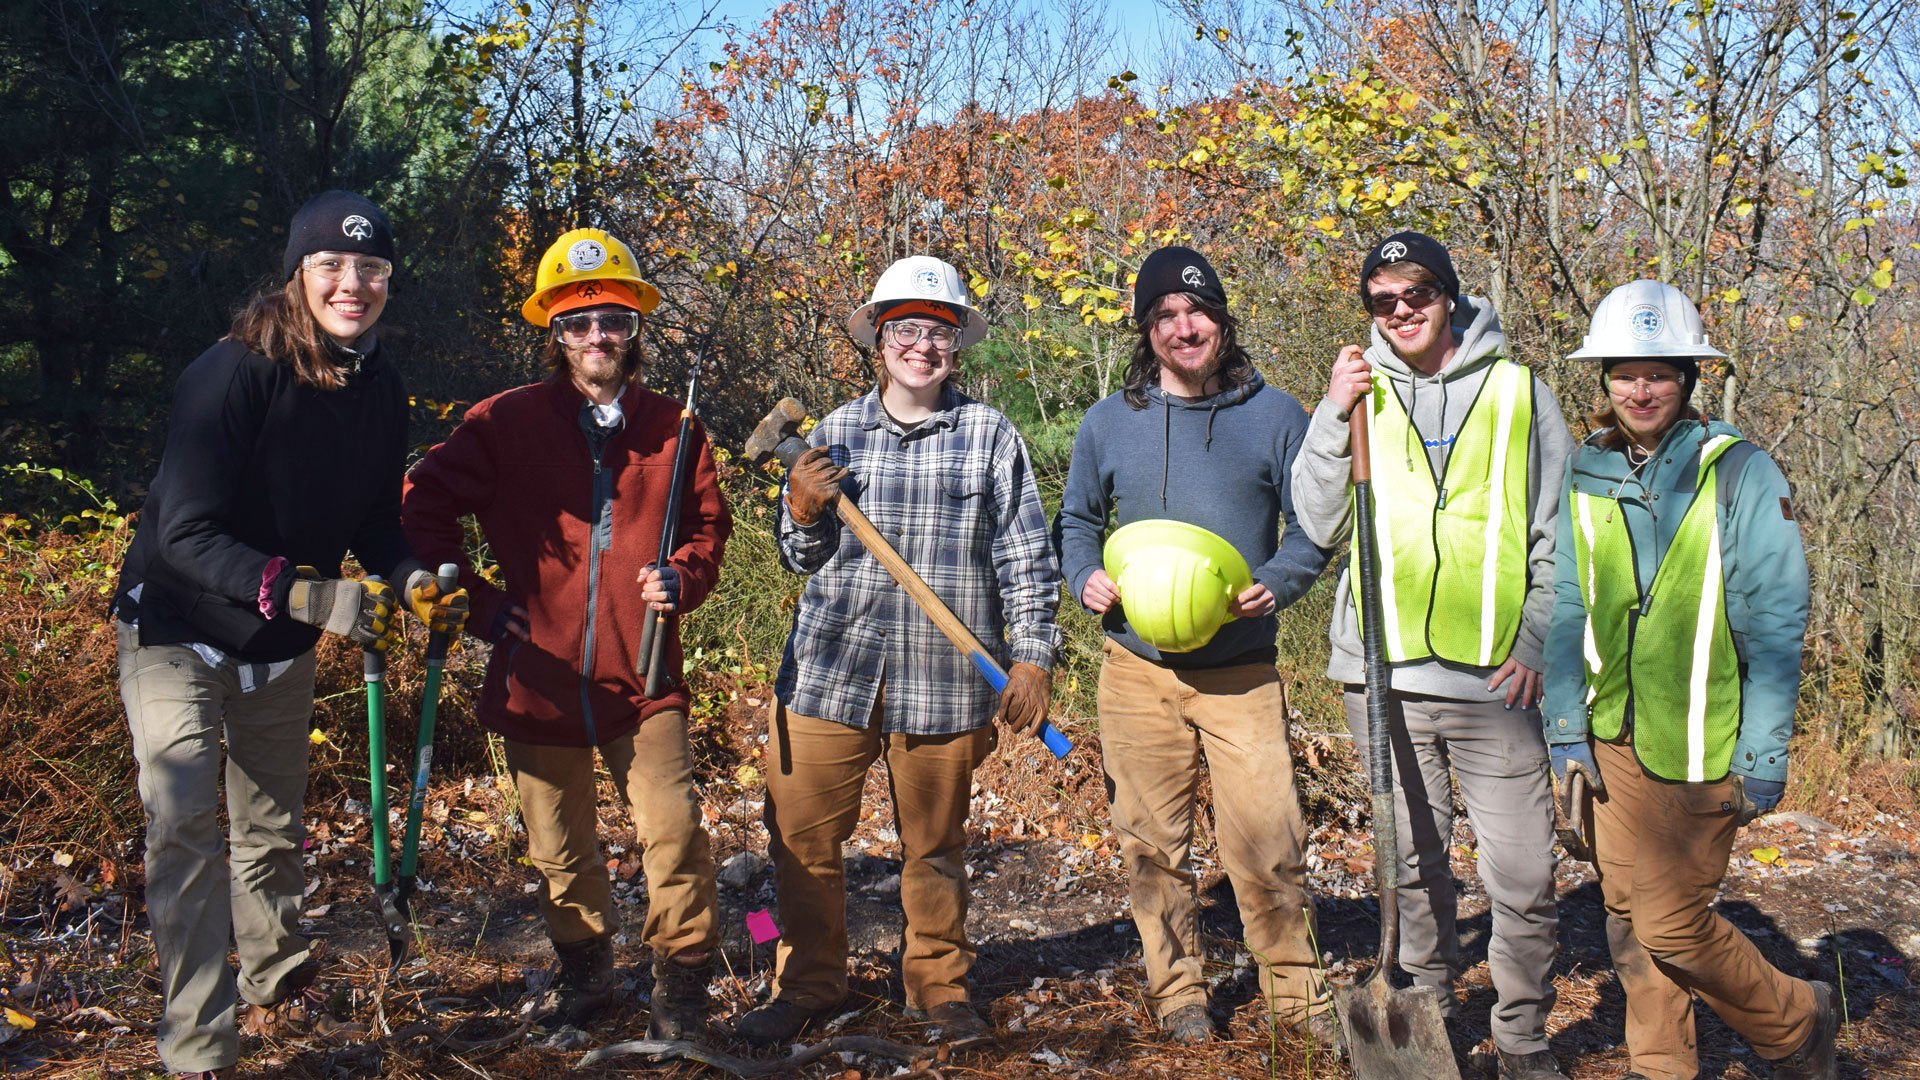 The Appalachian Trail Conservancy partnered with the American Conservation Experience and the National Park Foundation to host this volunteer youth-crew and provide the guidance and training needed for a successful project.